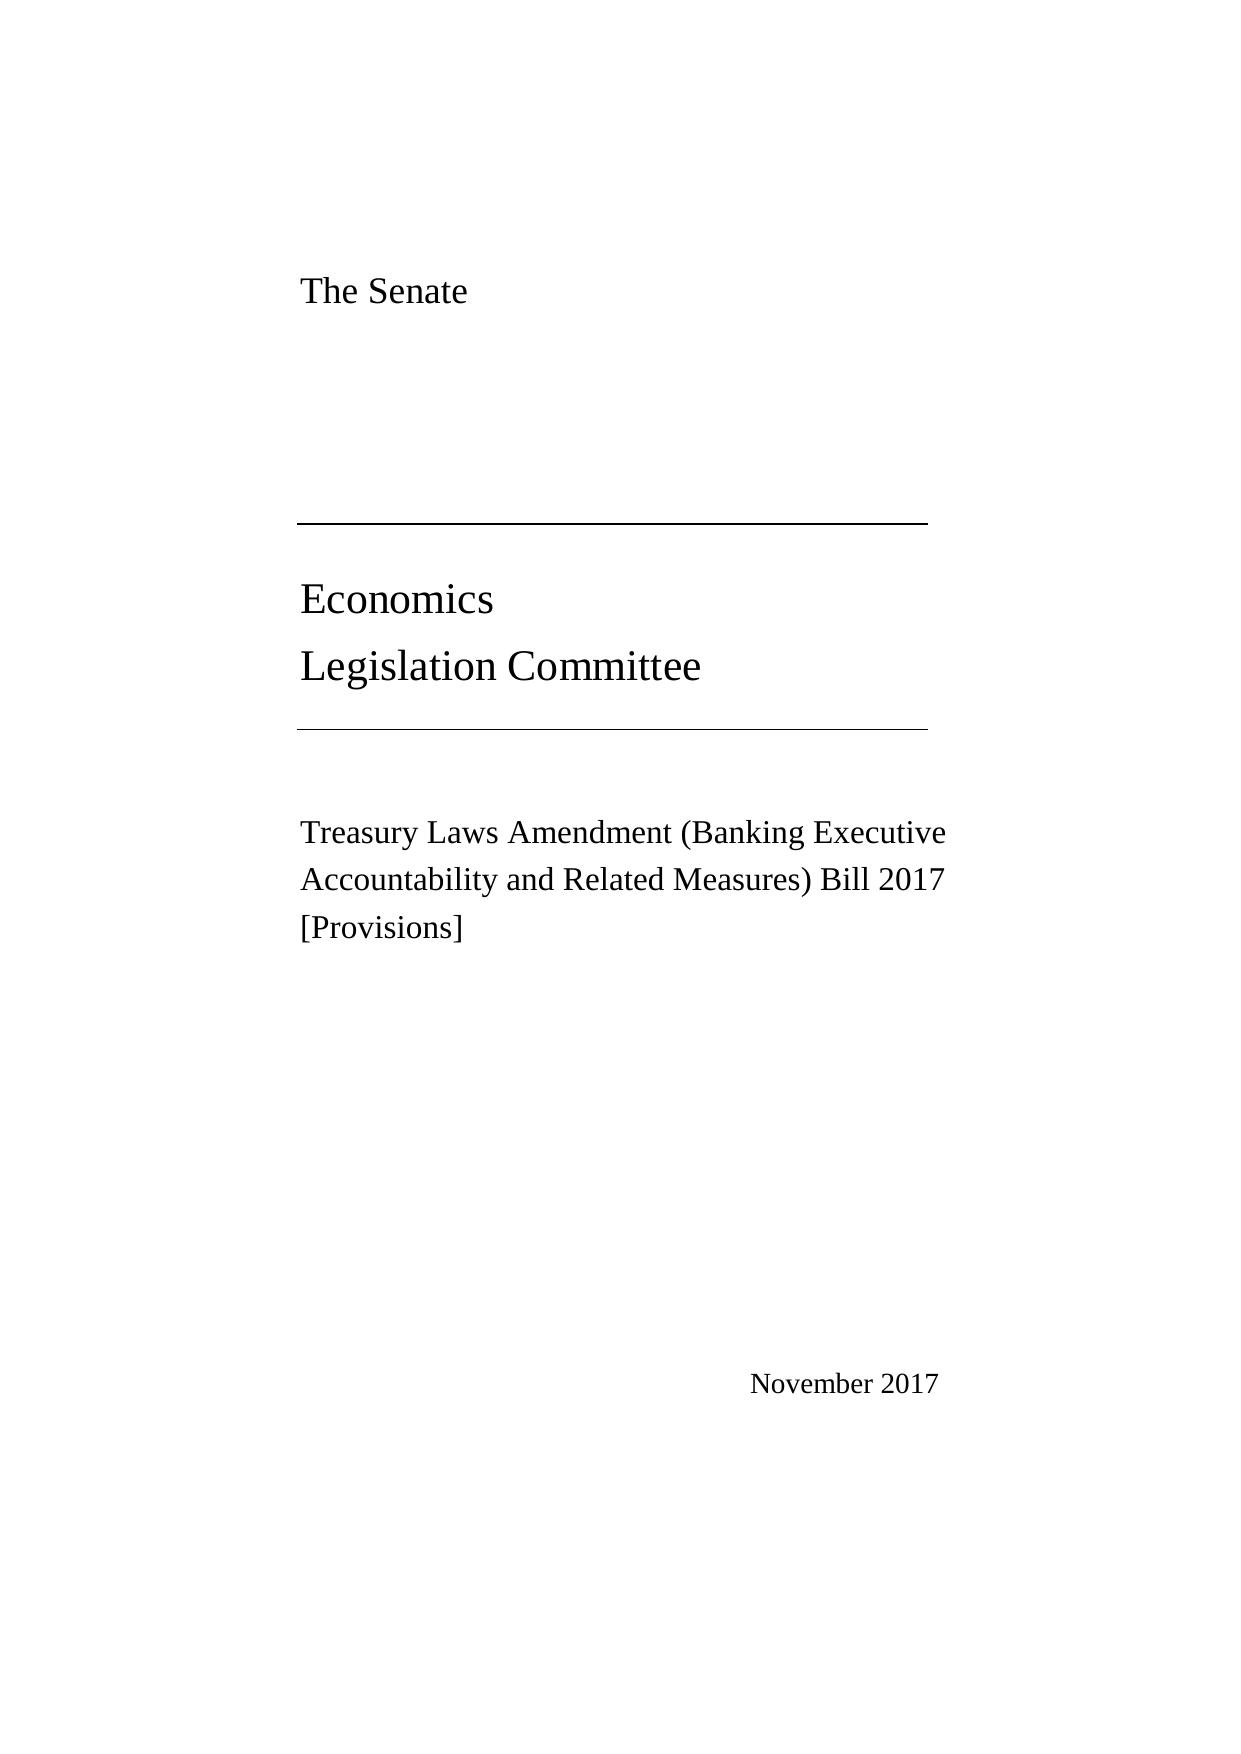 Treasury Laws Amendment (Banking Executive Accountability and Related Measures) Bill 2017 [Provisions]